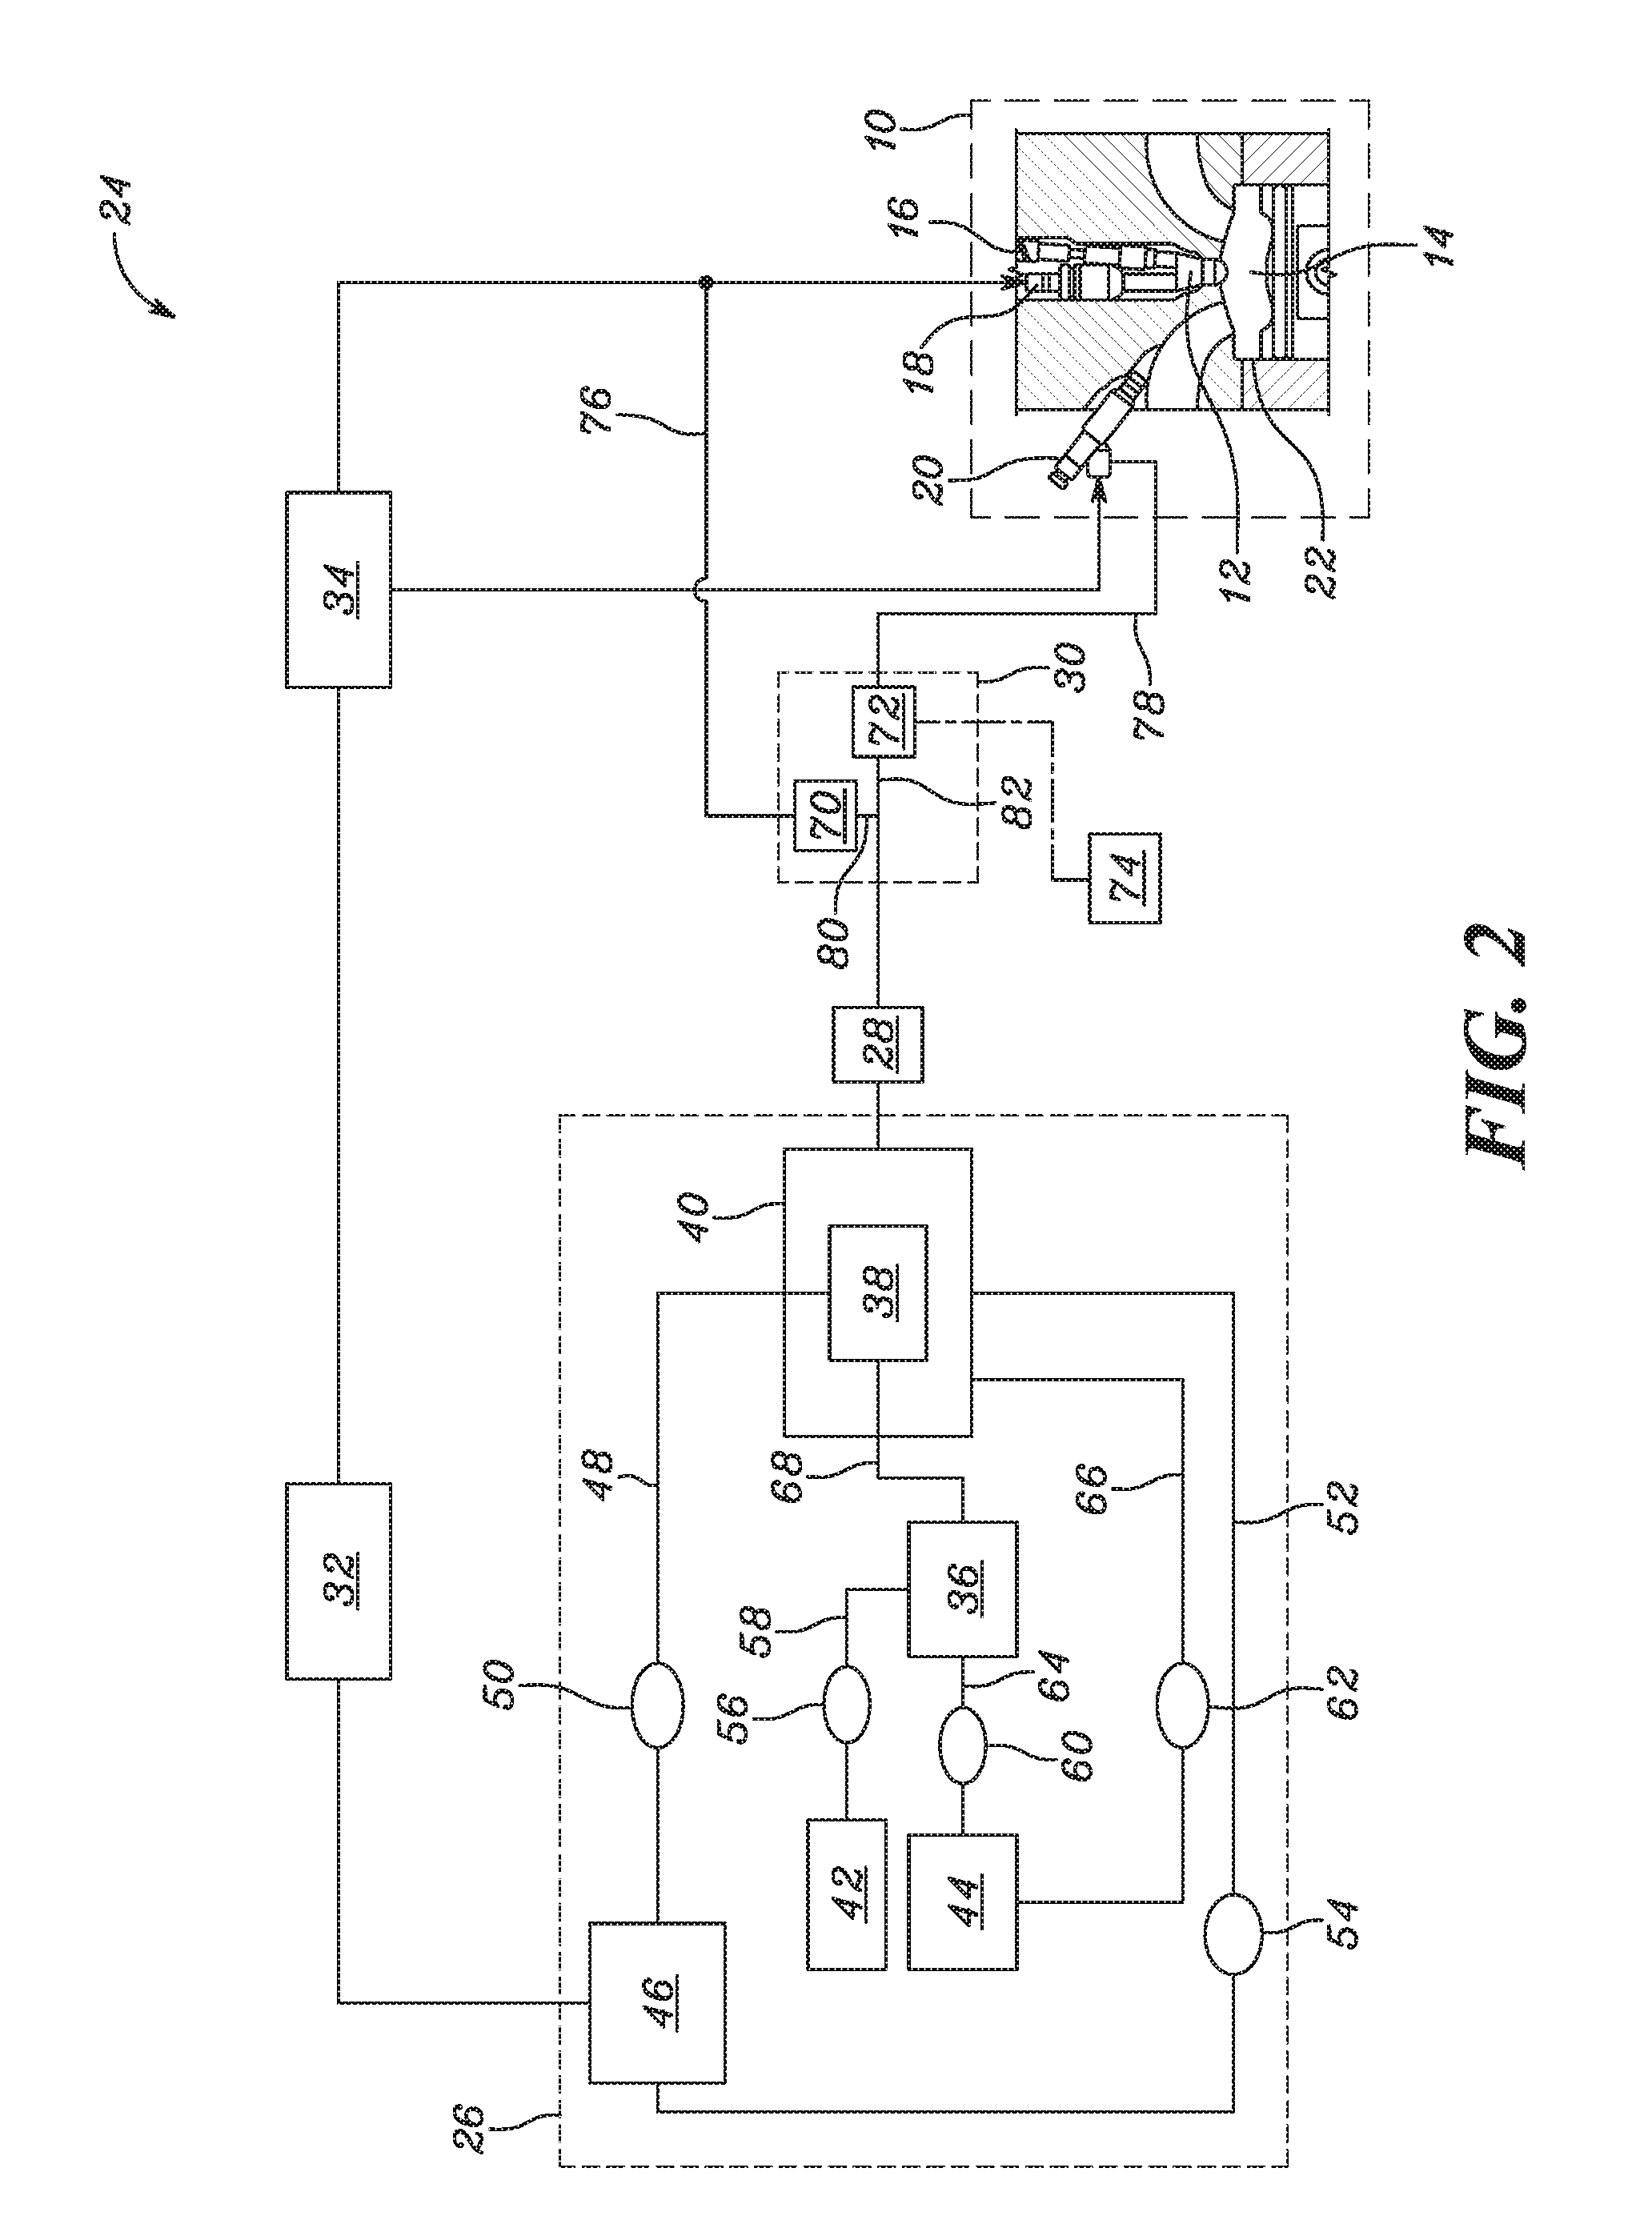 Fuel reformer system for multiple combustion chambers